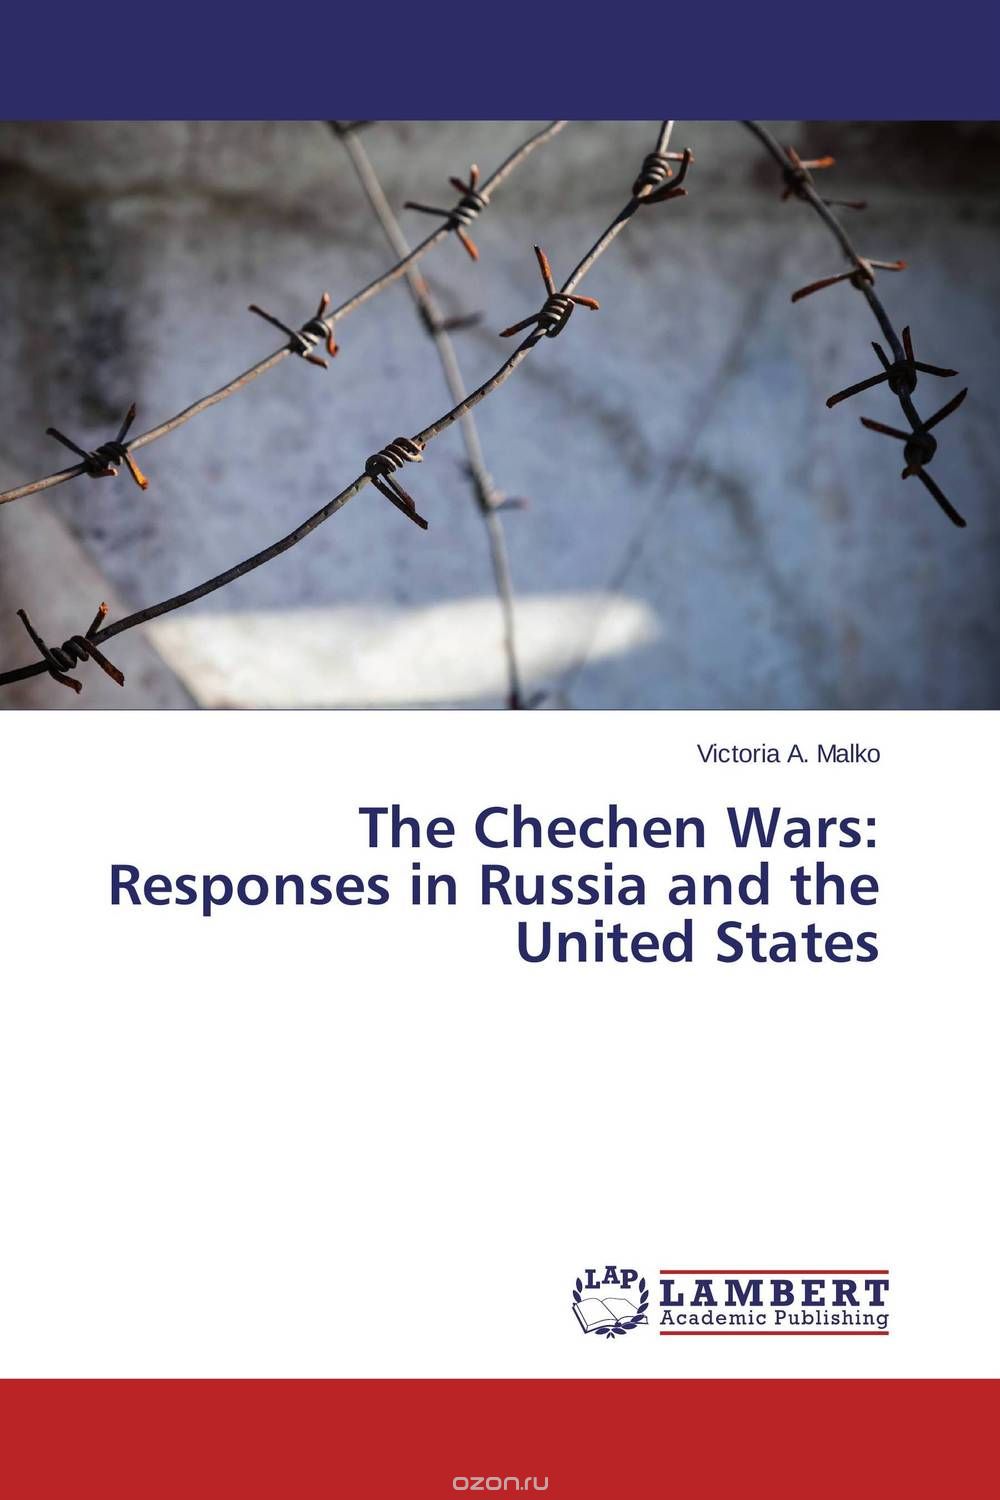 Скачать книгу "The Chechen Wars: Responses in Russia and the United States"